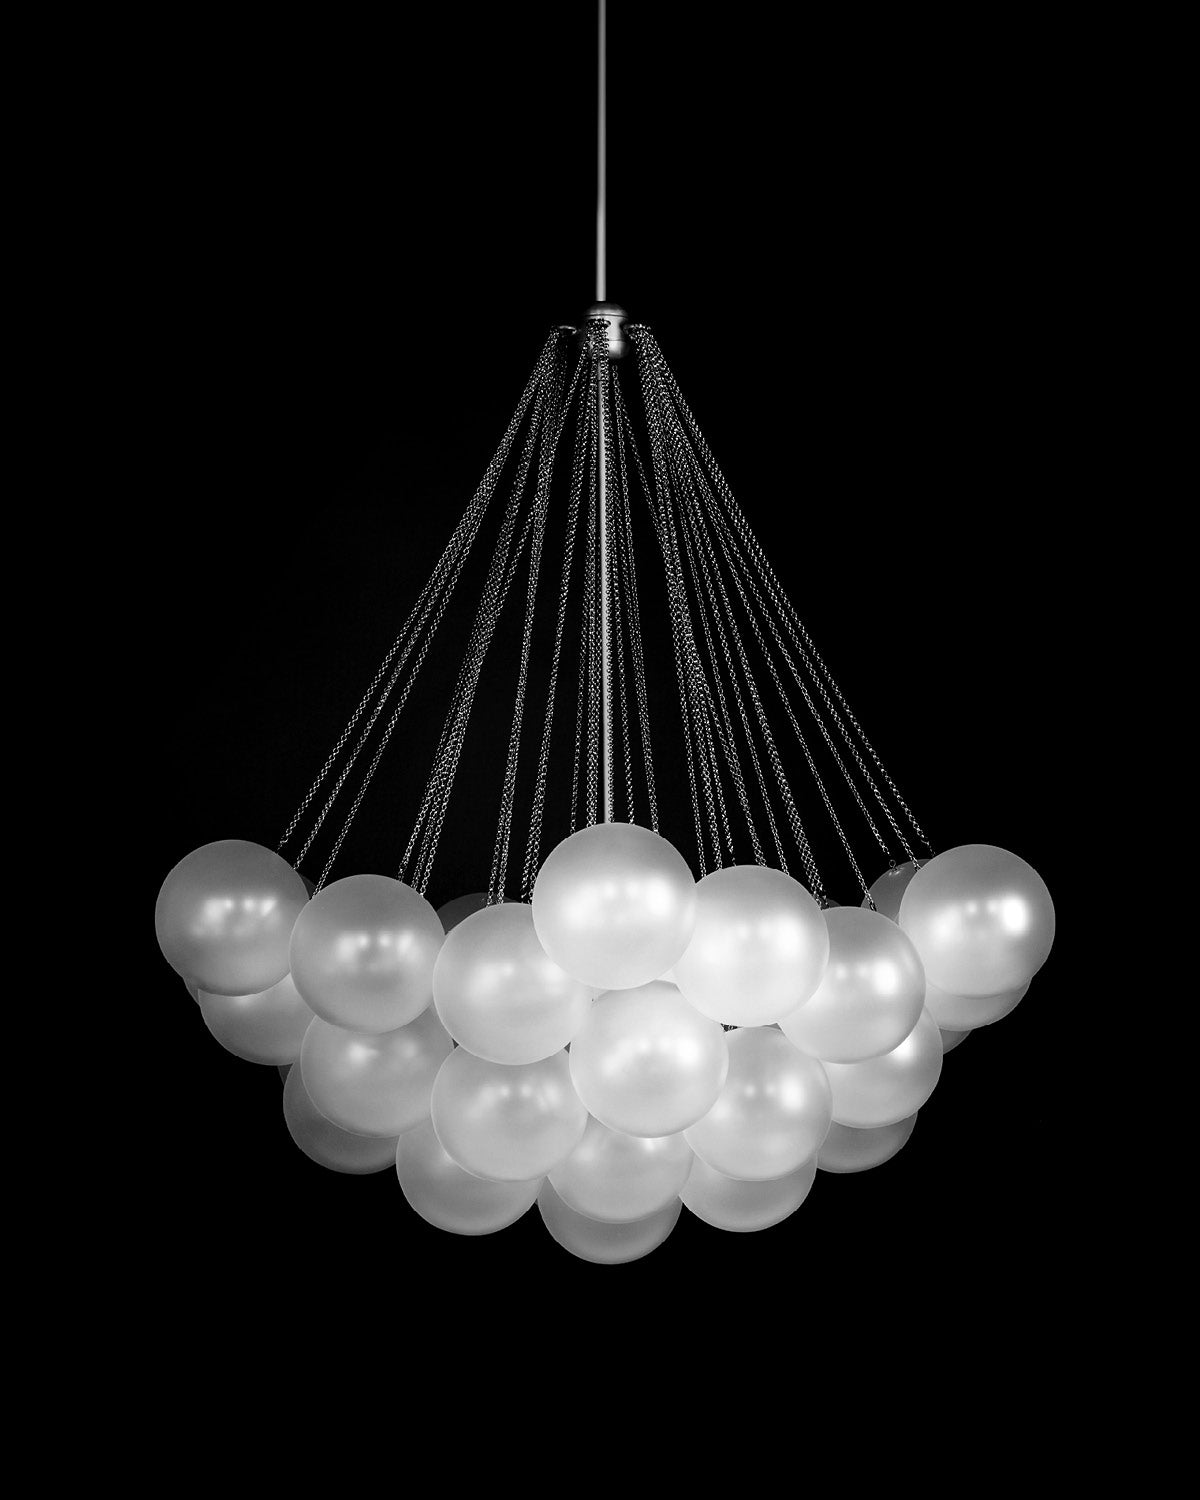 CLOUD : 37 chandelier in Tarnished Silver, hanging against a black background.